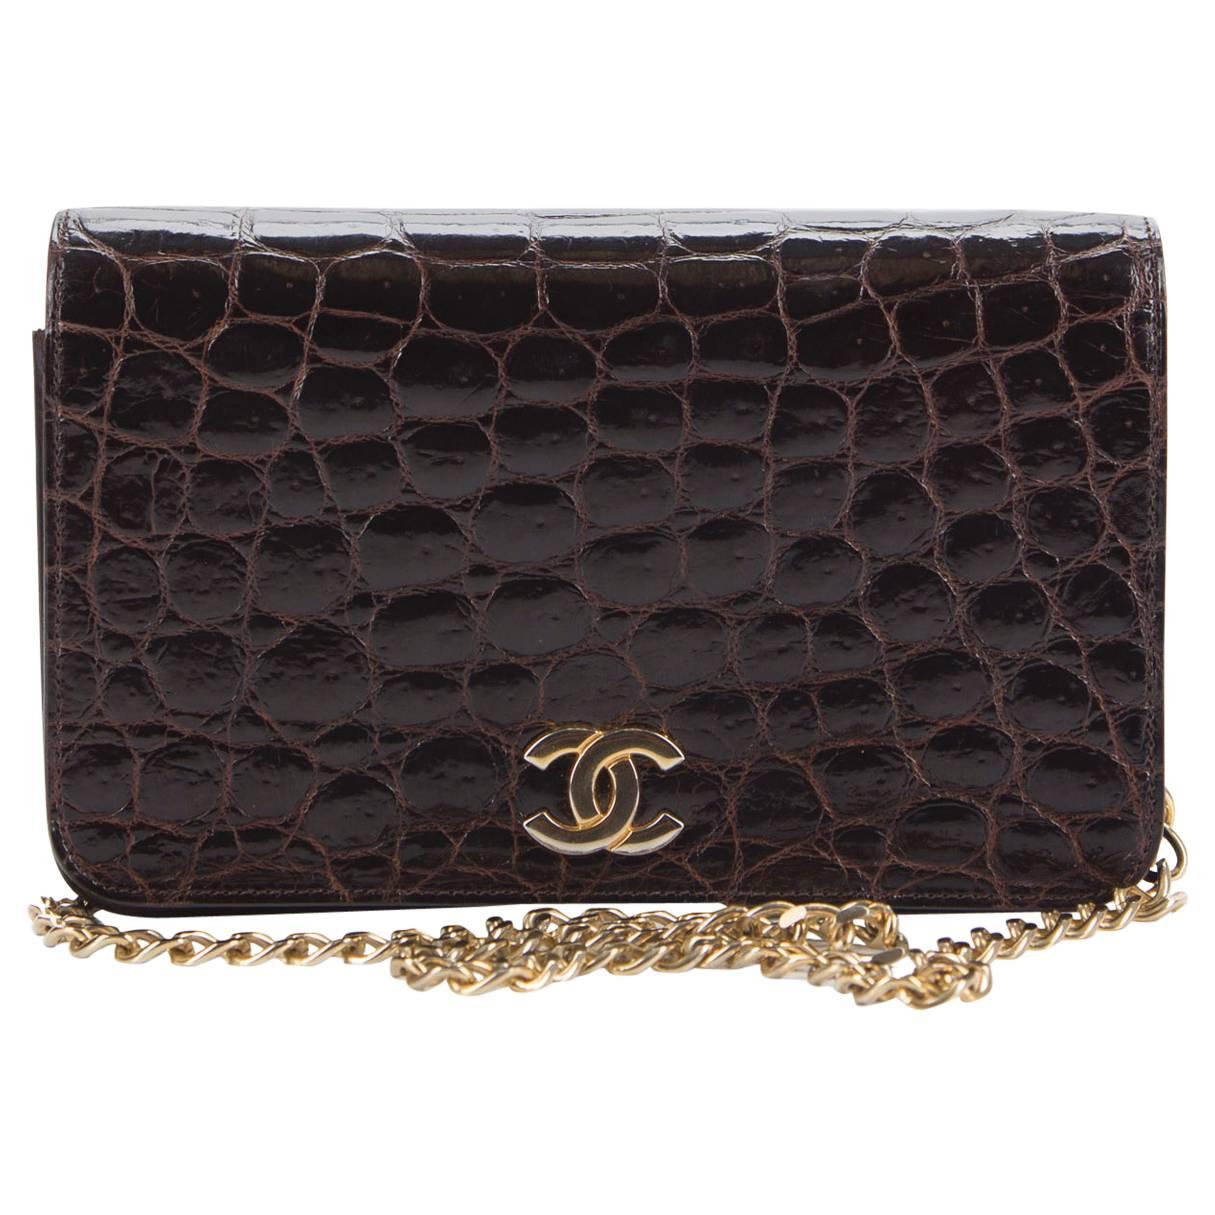 Vintage Chanel Brown Glazed Alligator Leather GHW Chain Strap Small Flap Bag For Sale